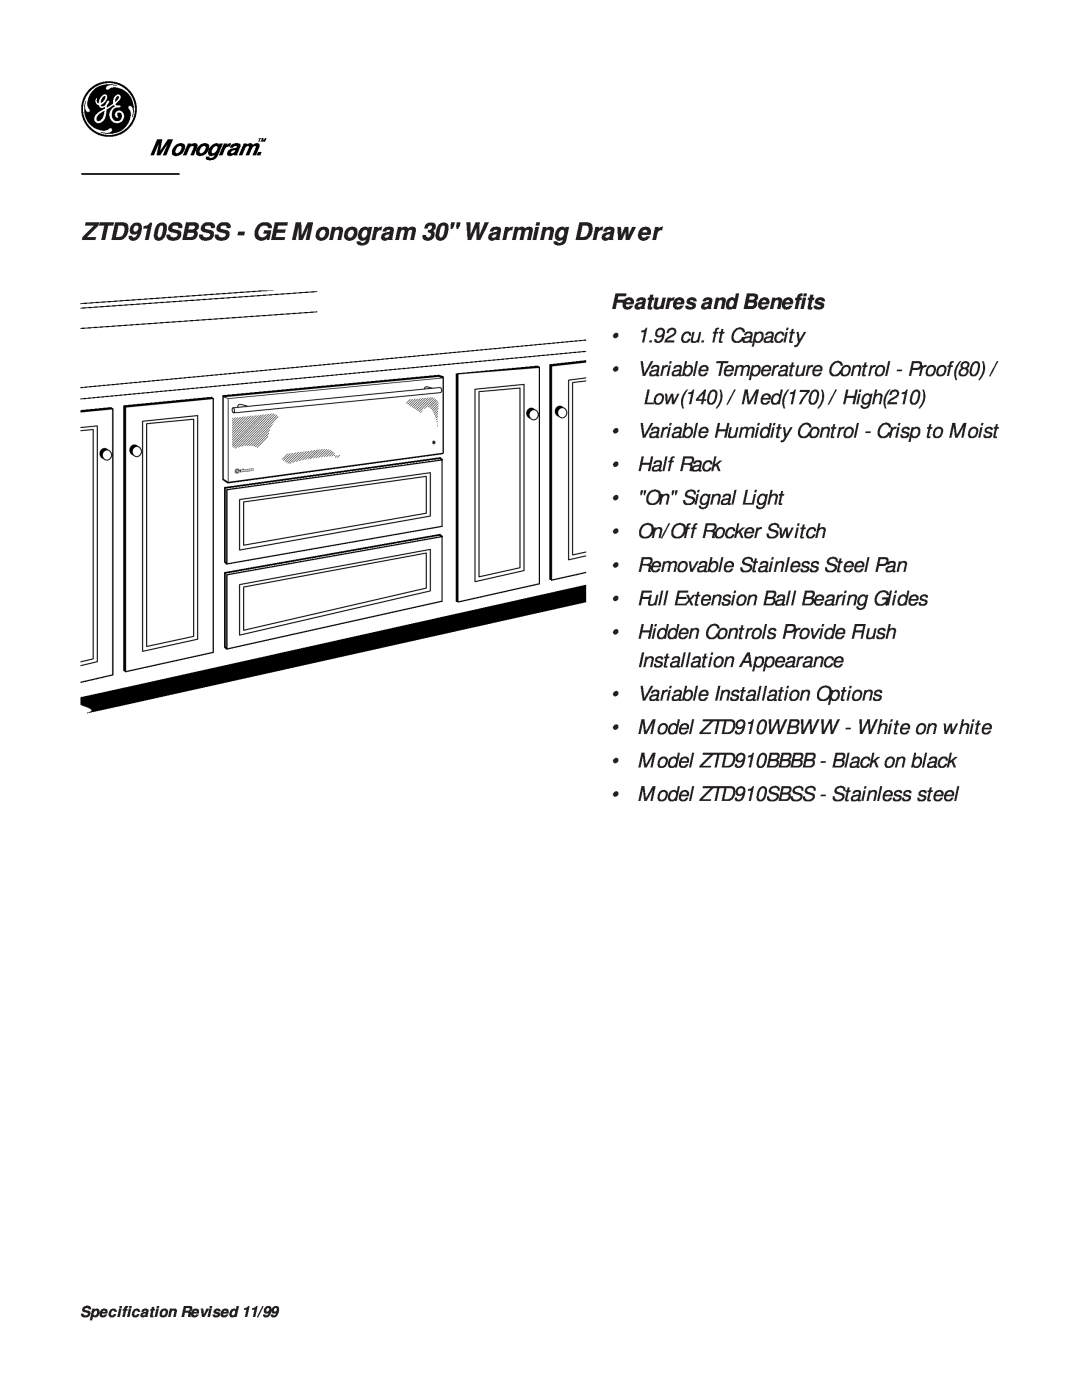 GE dimensions Features and Benefits, ZTD910SBSS - GE Monogram 30 Warming Drawer 